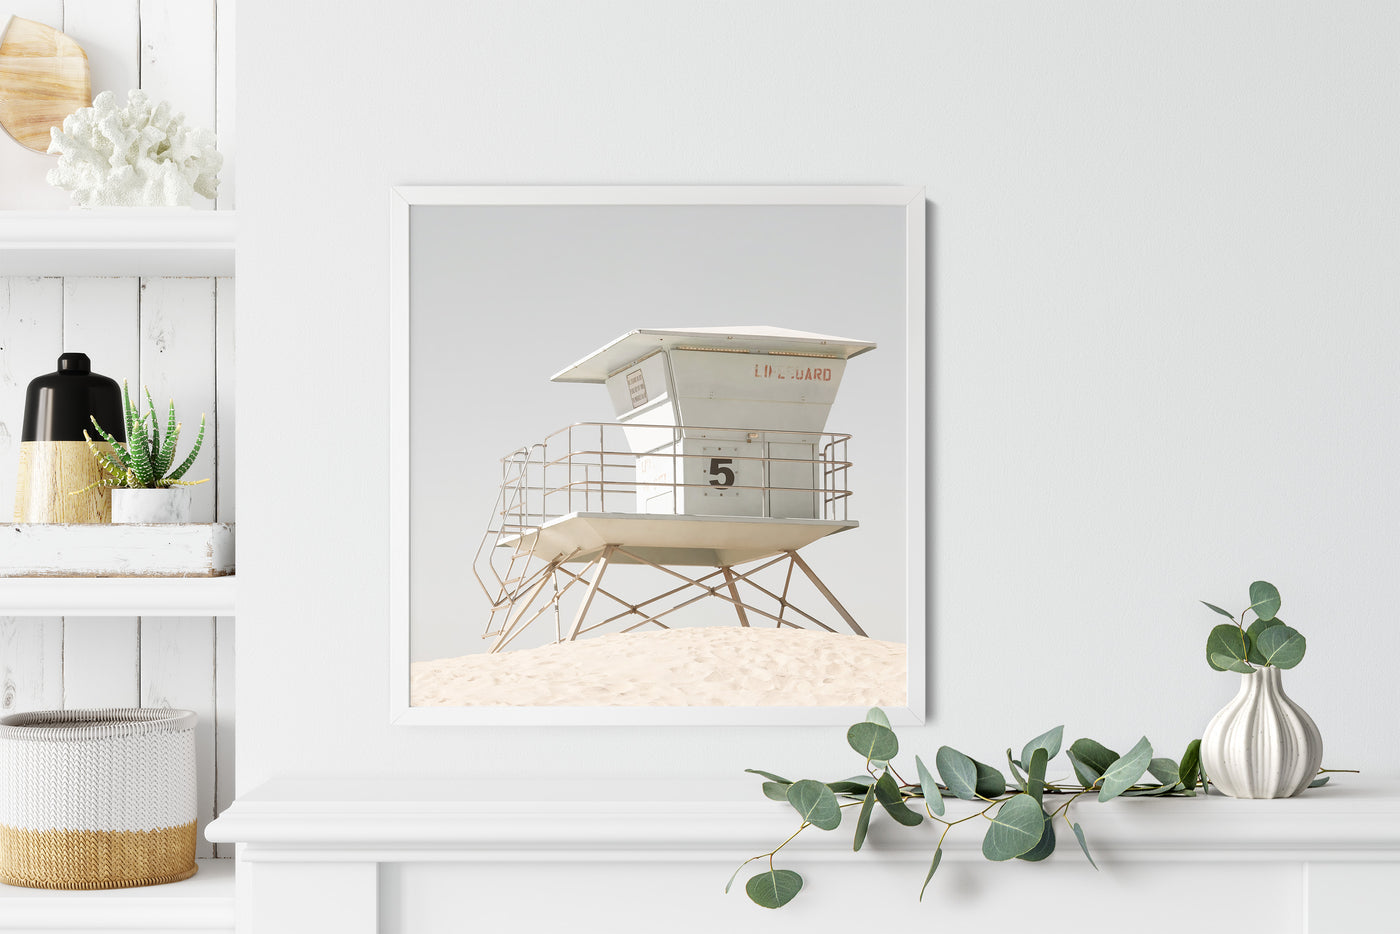 California Dreaming No 2 - Lifeguard tower art print by Cattie Coyle Photography